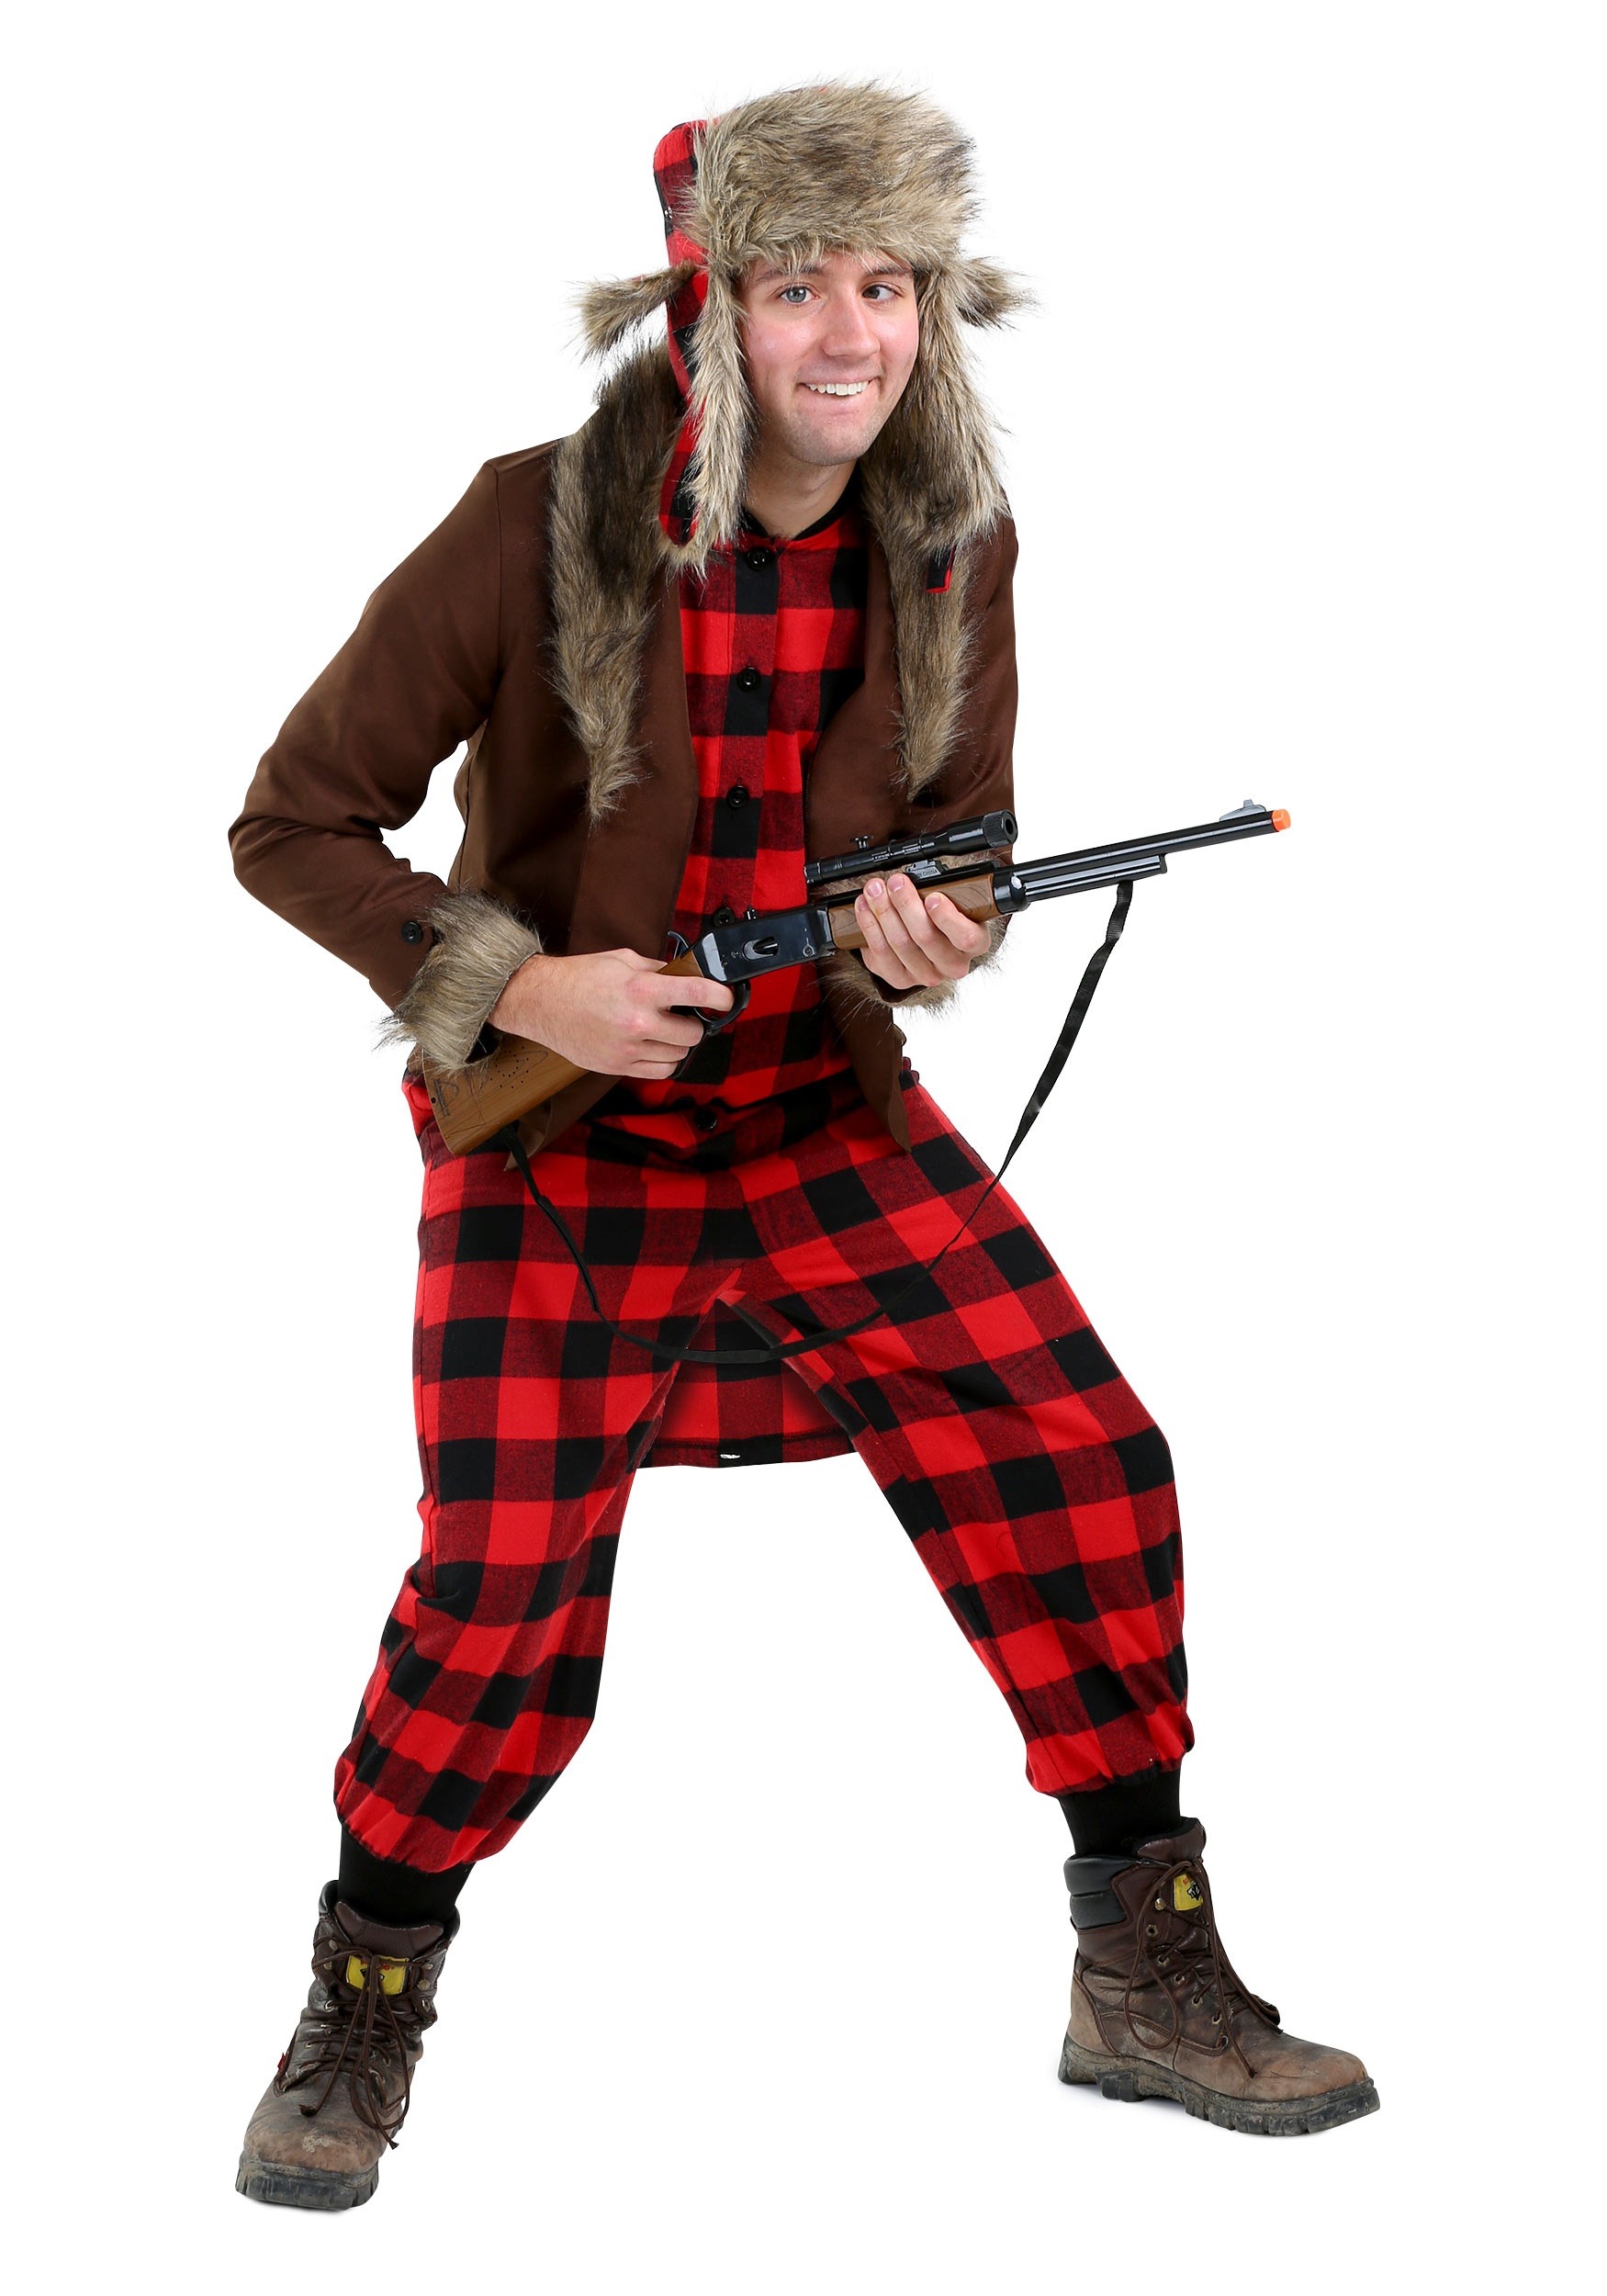 trapper hhunter halloween costumes 2020 Funny Wabbit Hunter Costume For Adults trapper hhunter halloween costumes 2020